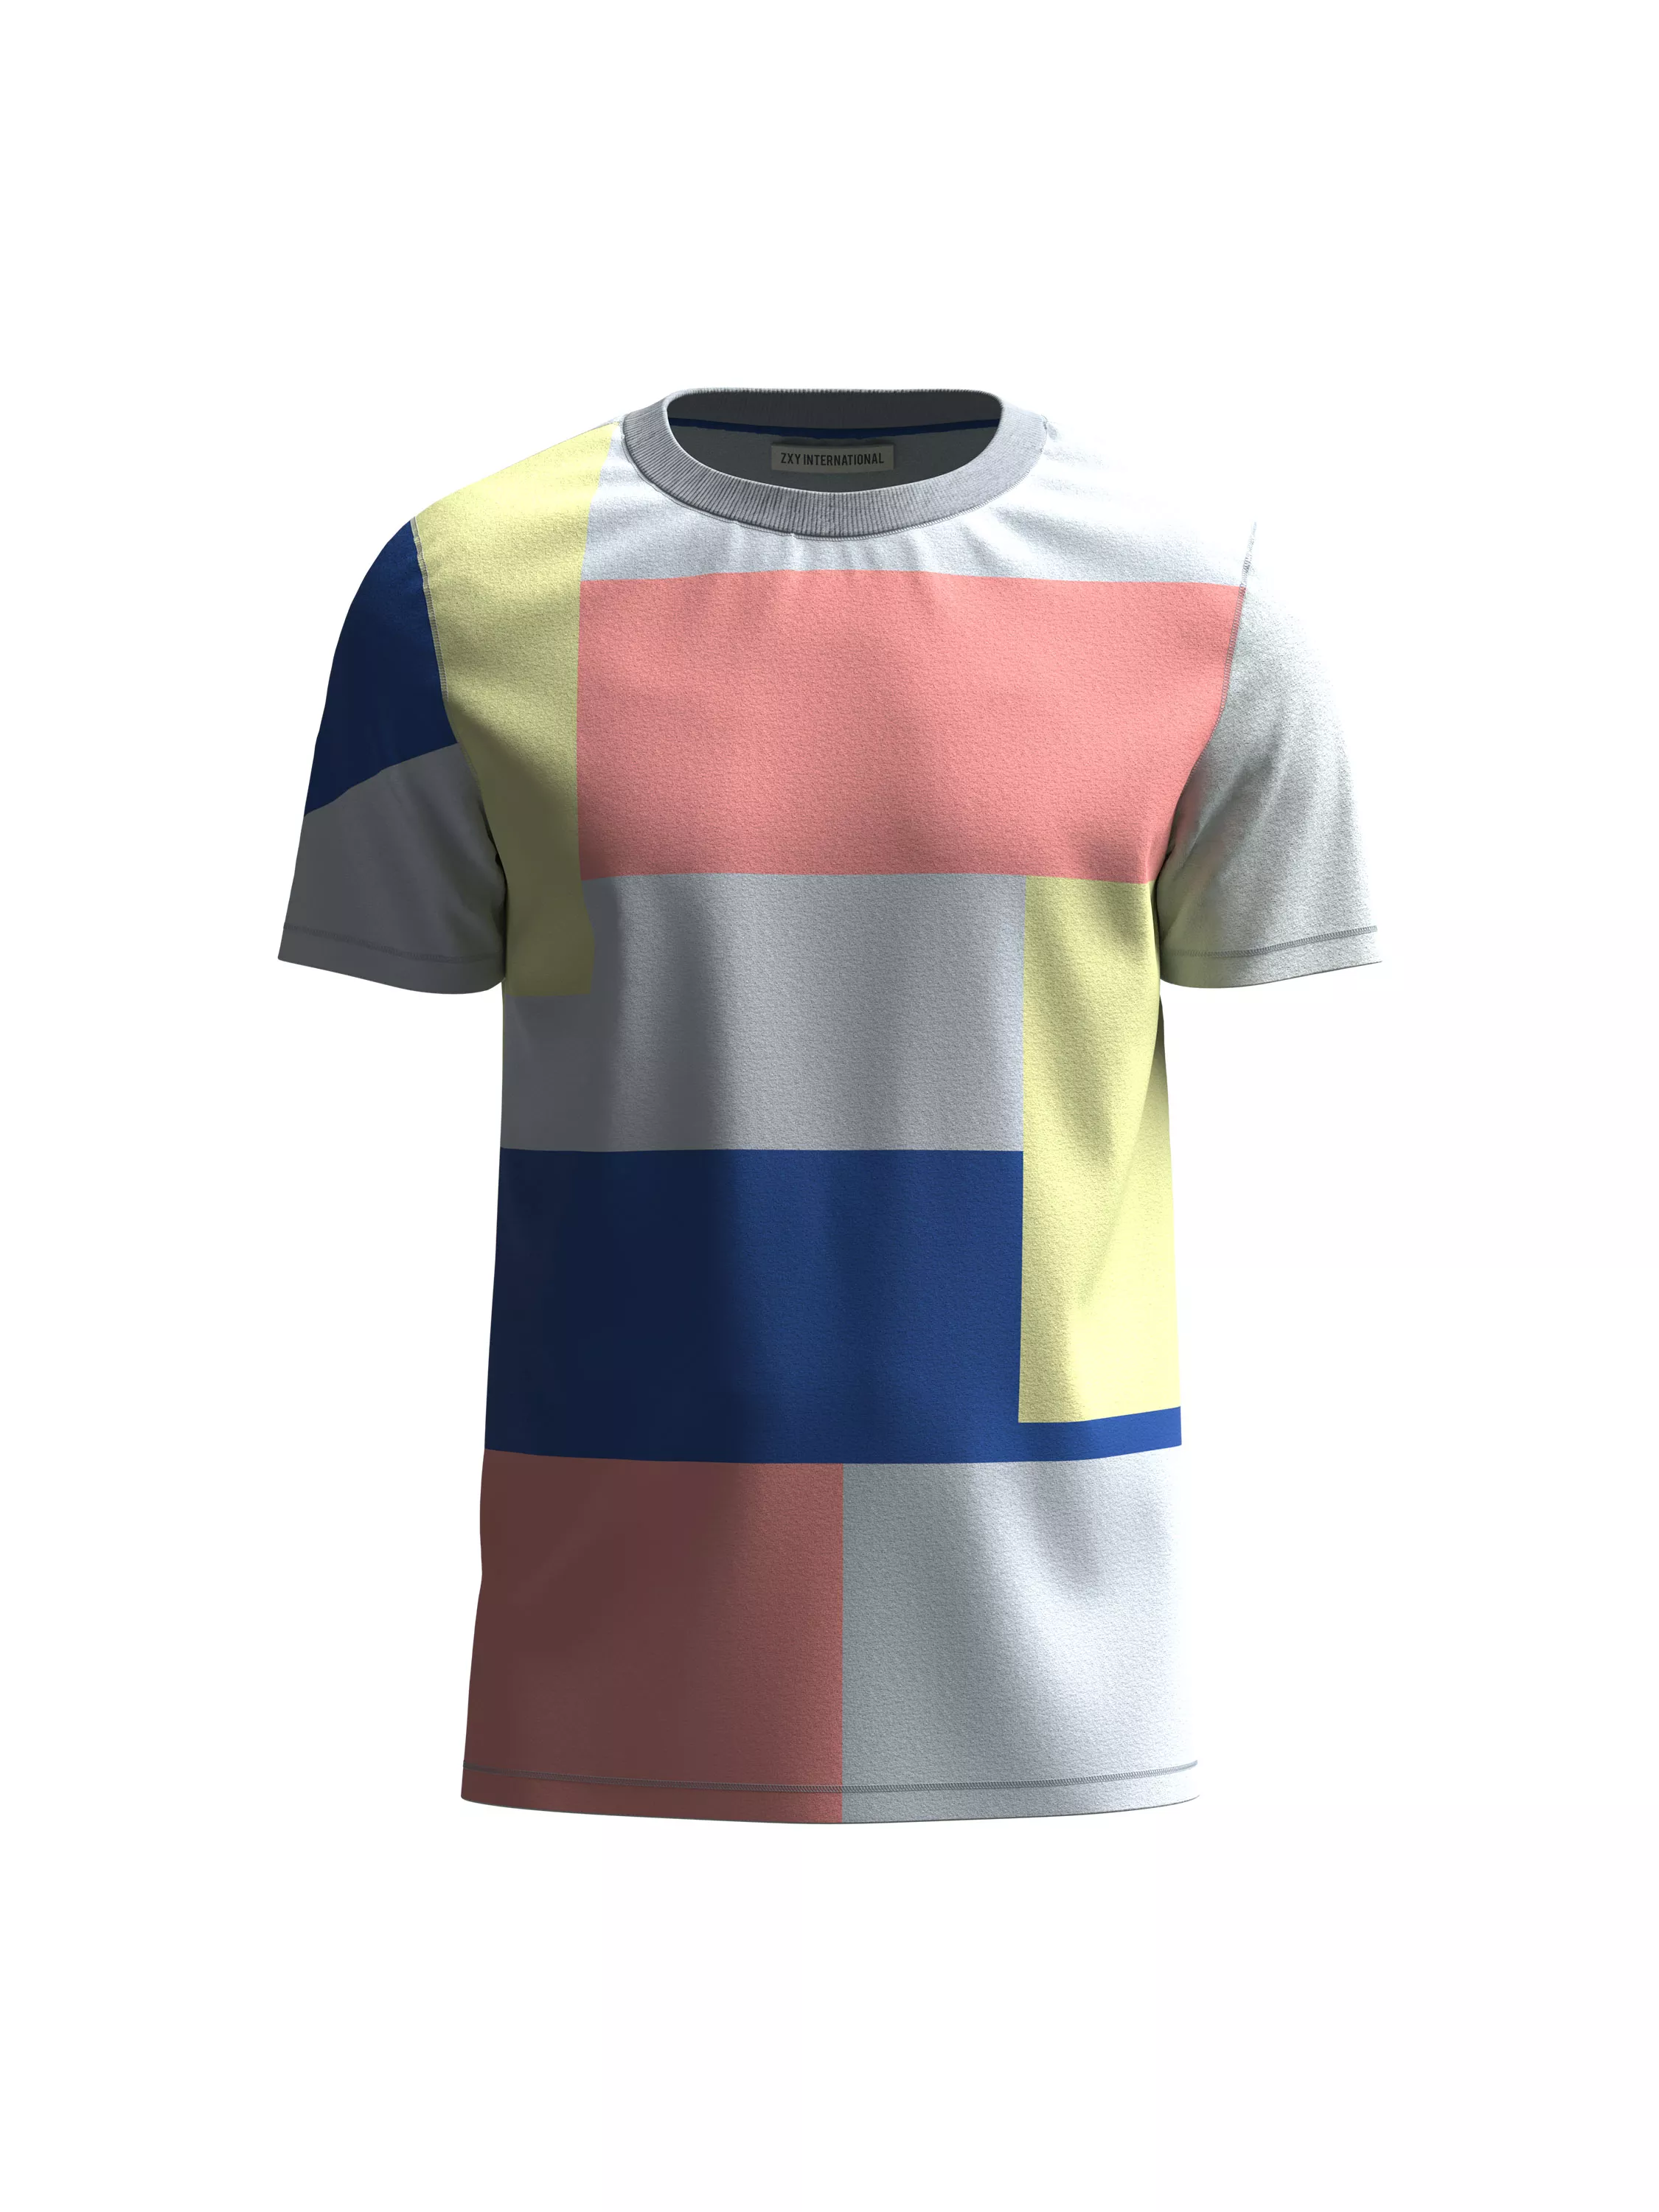 Mens Sublimation printed Tee (front)